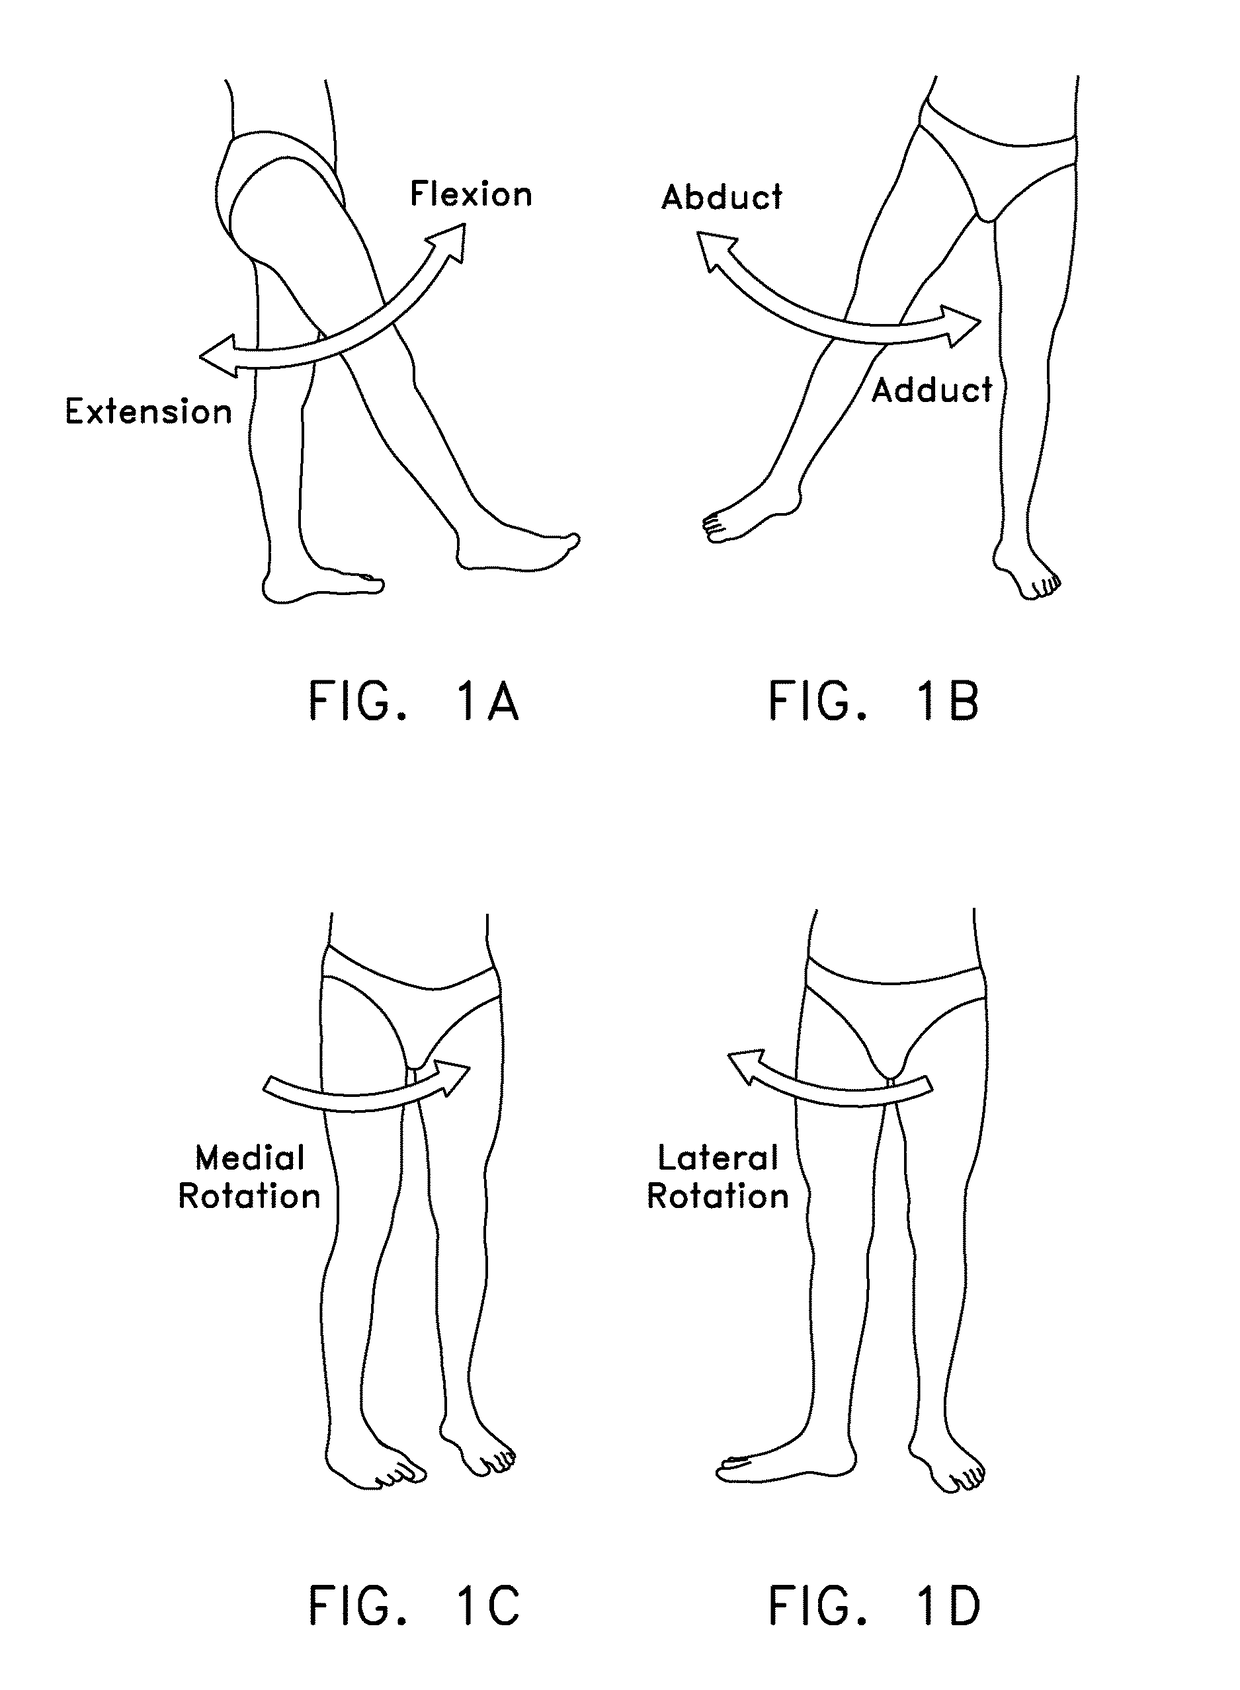 Method and apparatus for reconstructing a hip joint, including the provision and use of a novel arthroscopic debridement template for assisting in the treatment of cam-type femoroacetabular impingement